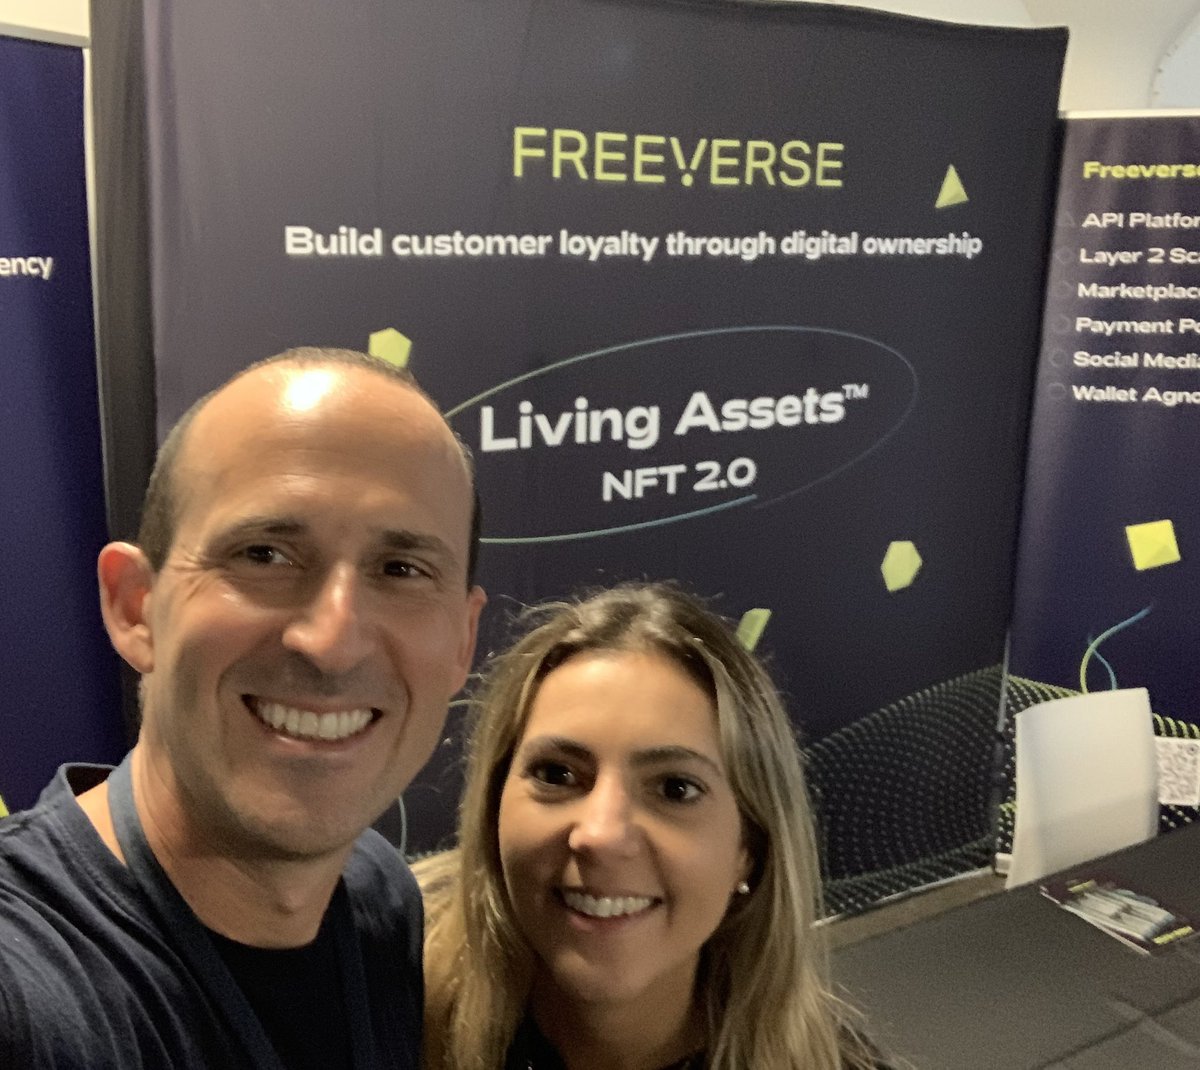 We’re here in #MetaBeat! Get your Freeverse free NFT and level it up. How? ( events.livingassets.io). Then share and tag @Freeverse.io #LivingAssets #NextGenNFTs